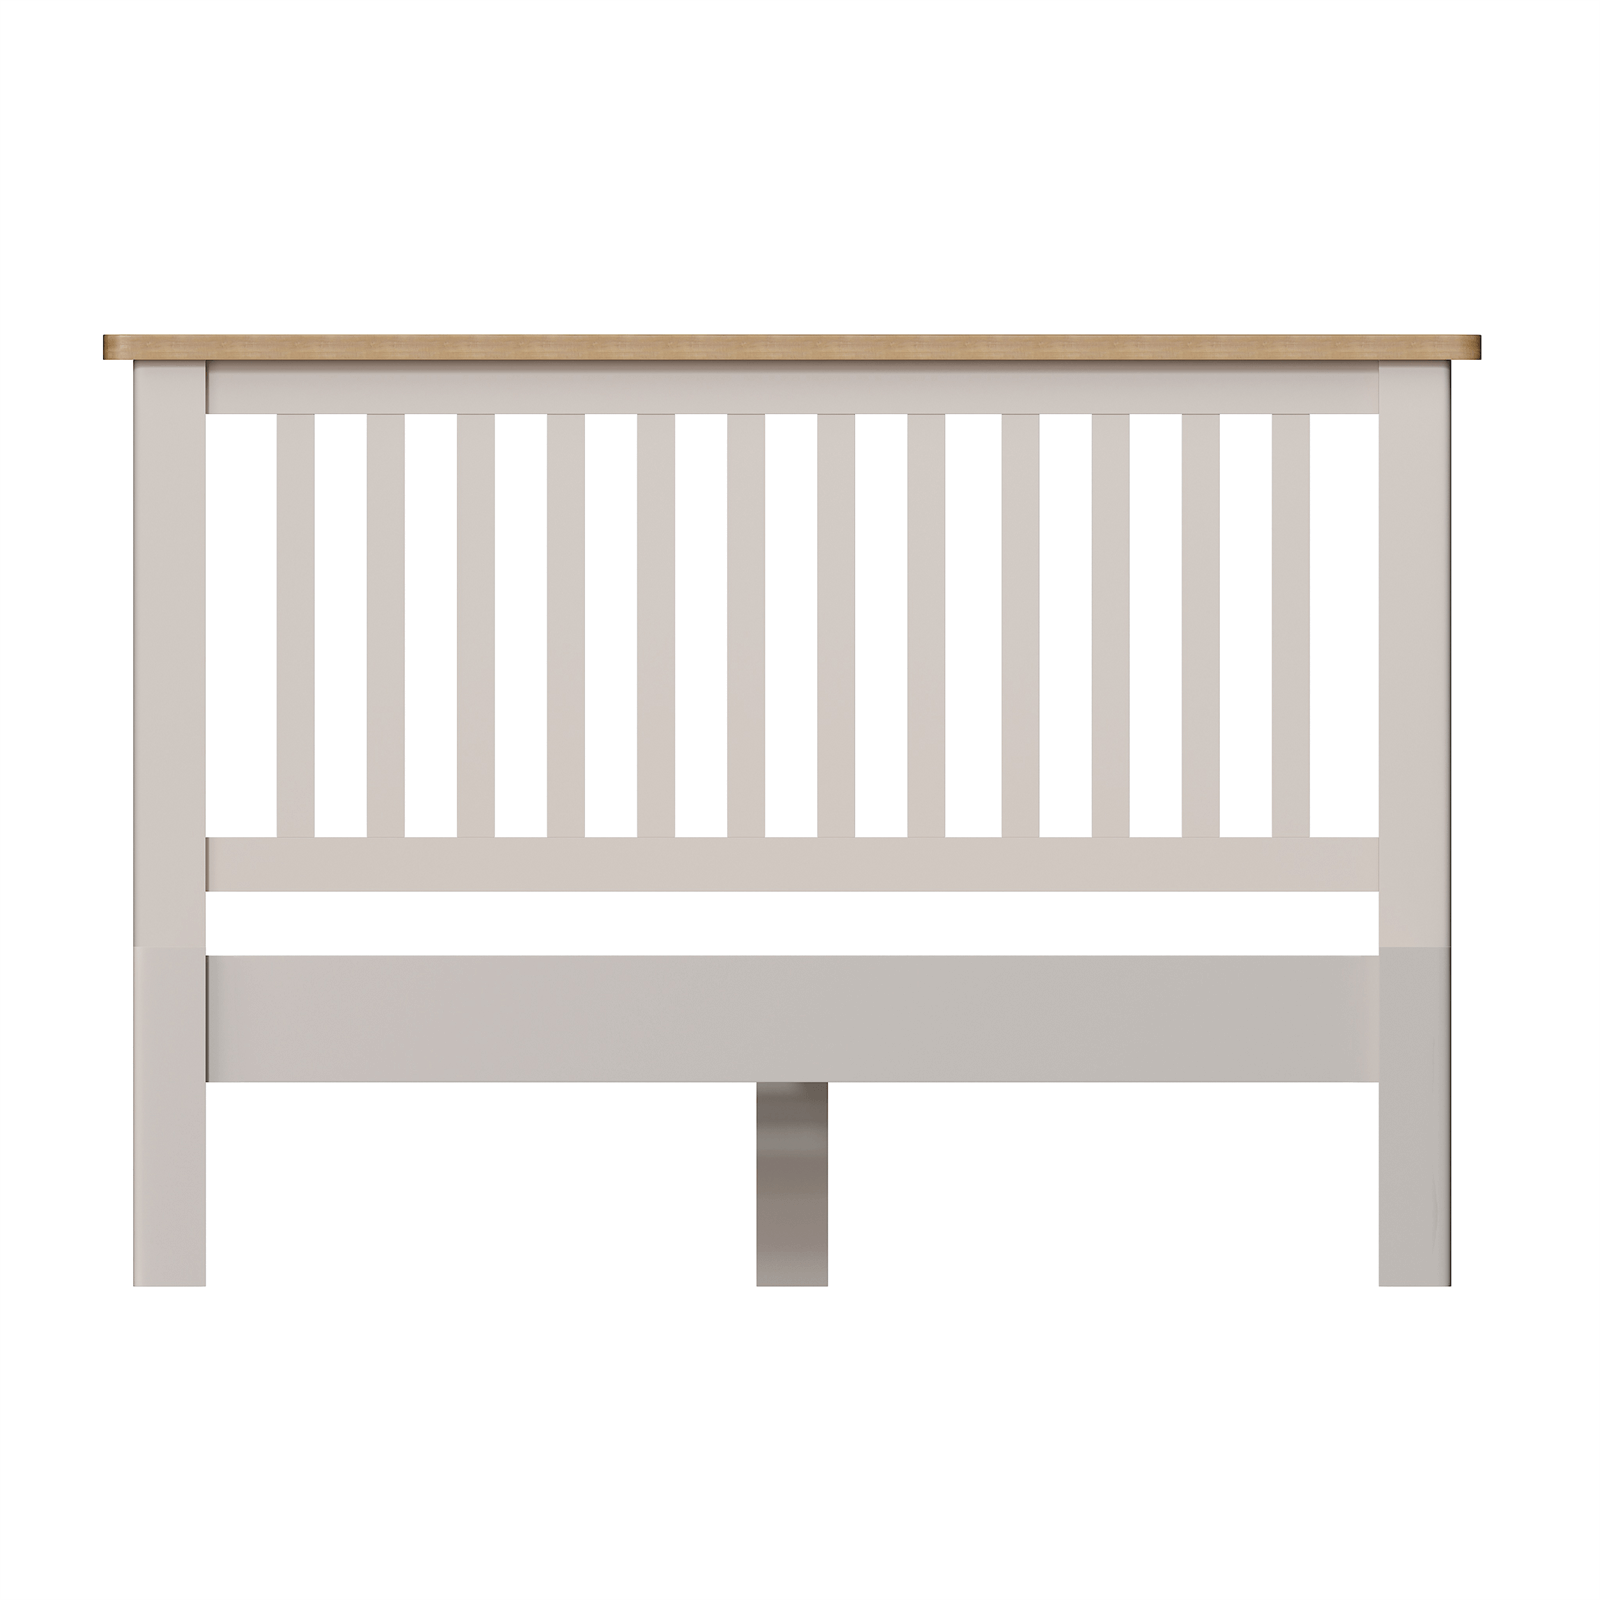 Padstow Double Bed Frame - Truffle